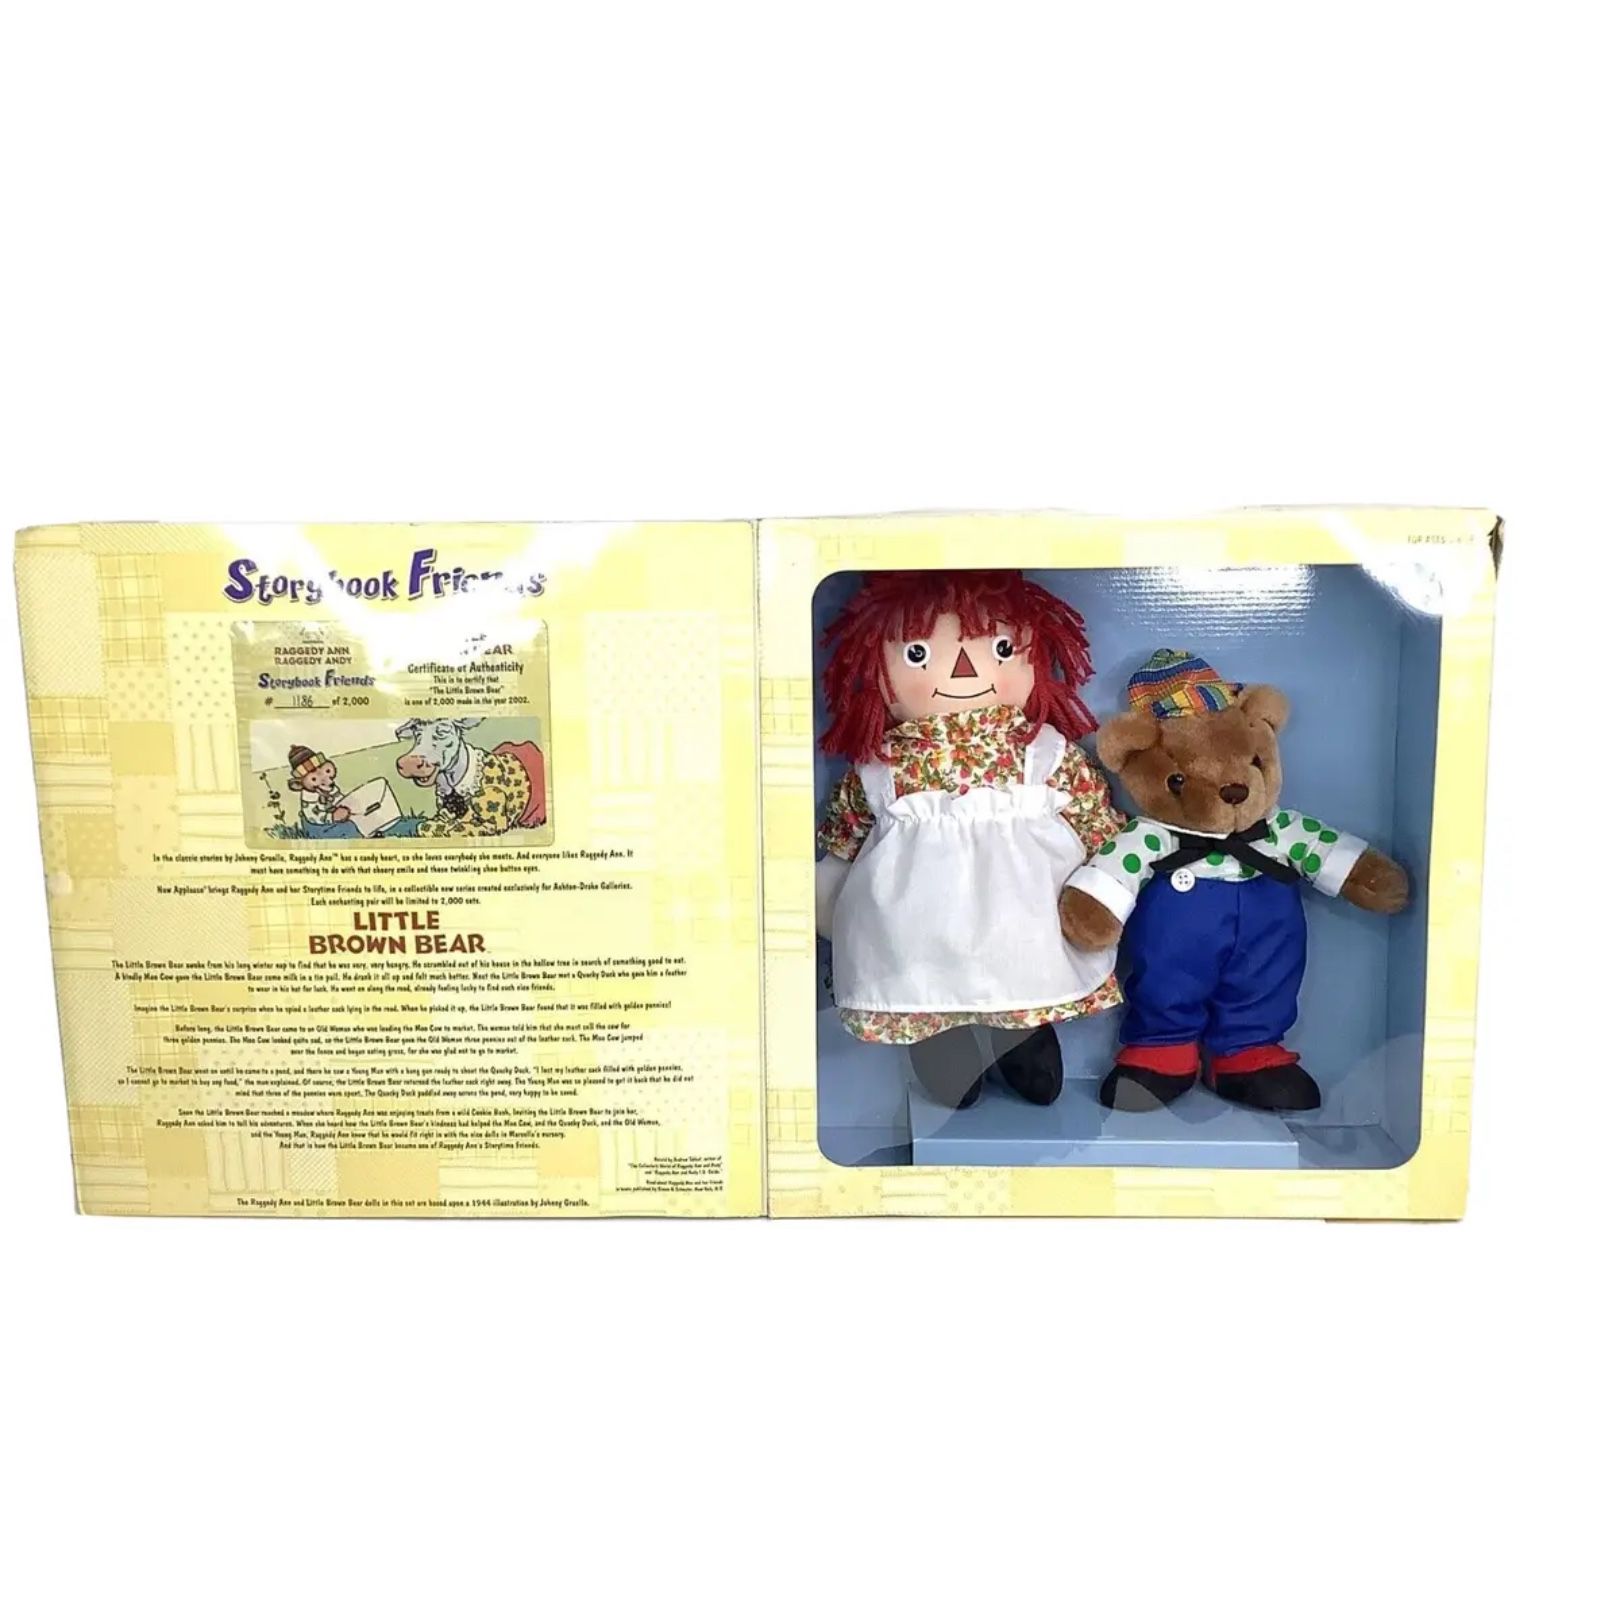 Raggedy Ann & Andy Storybook Friends Little Brown Bear Doll Set Applause 2002